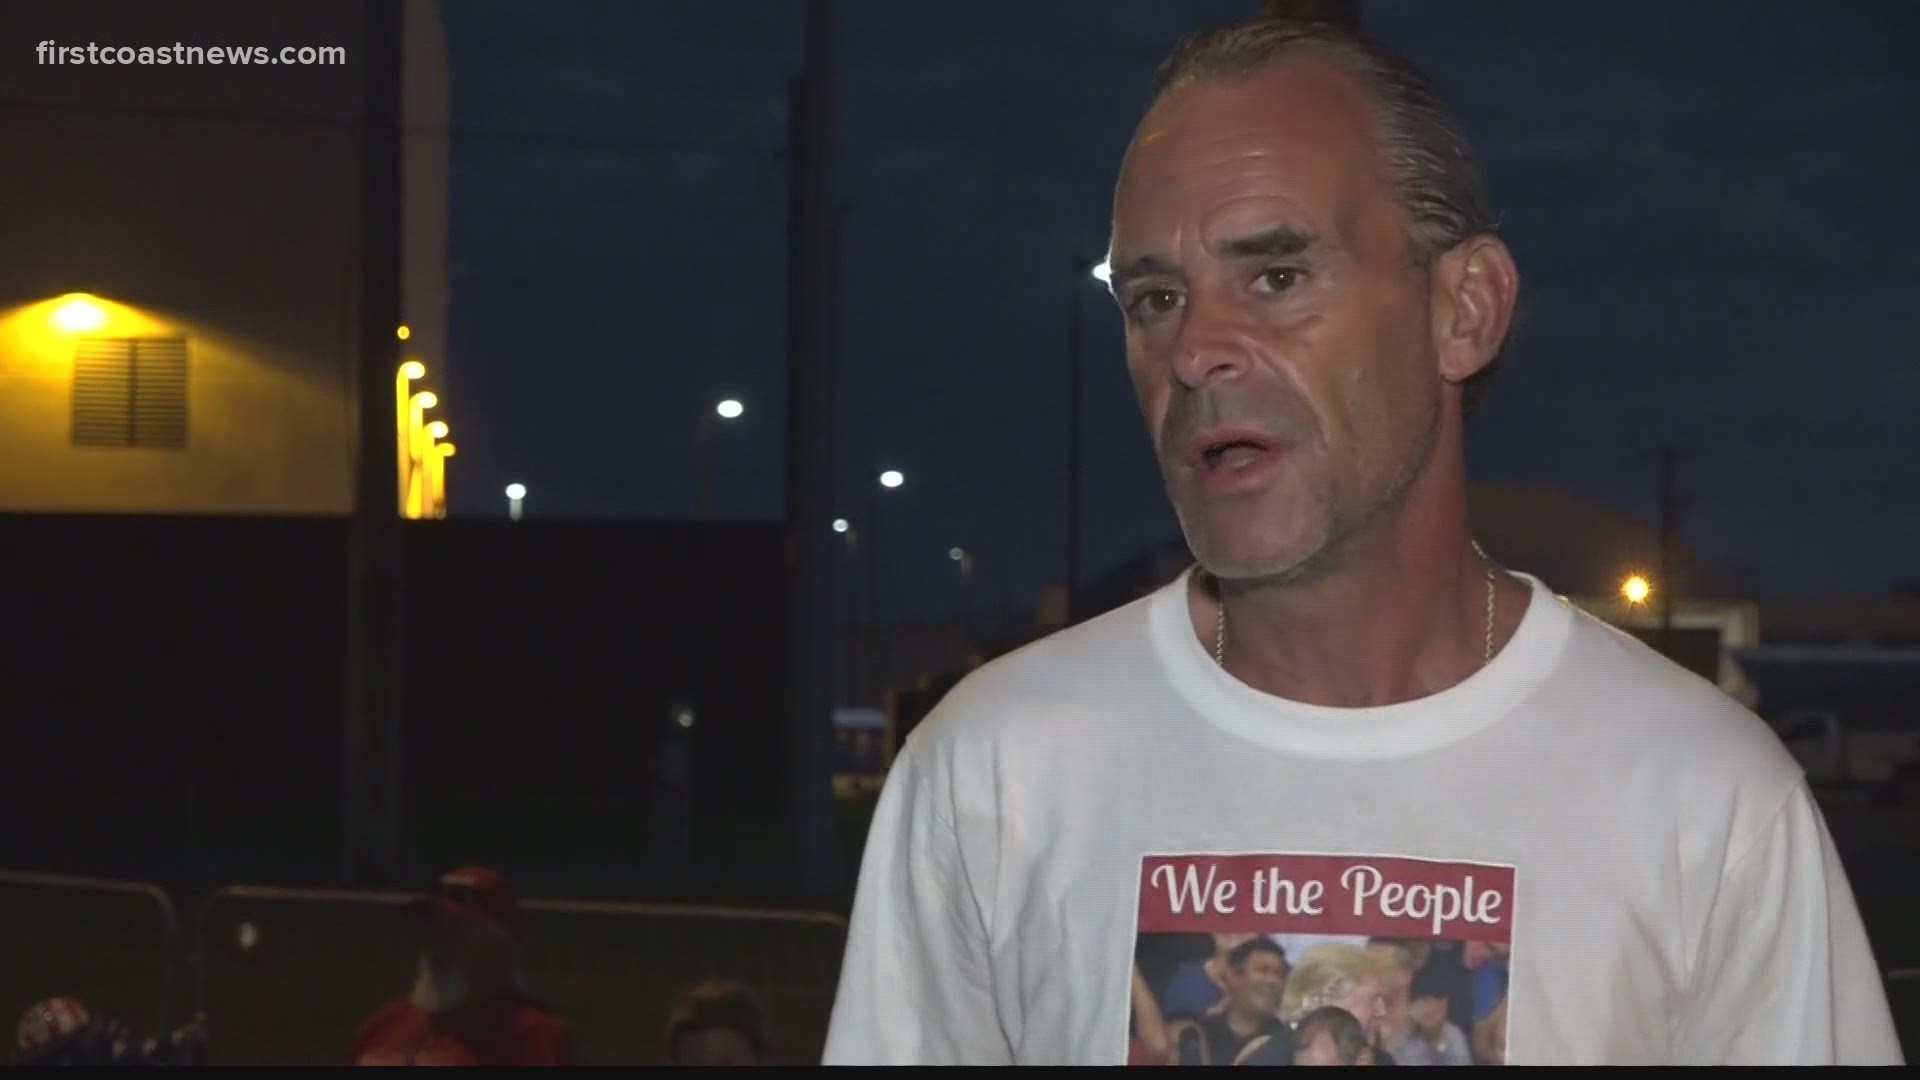 This is Gene Huber's 20th Trump rally. “It’s just an honor as far as I’m concerned and it is all for the love and support of the President," he said.